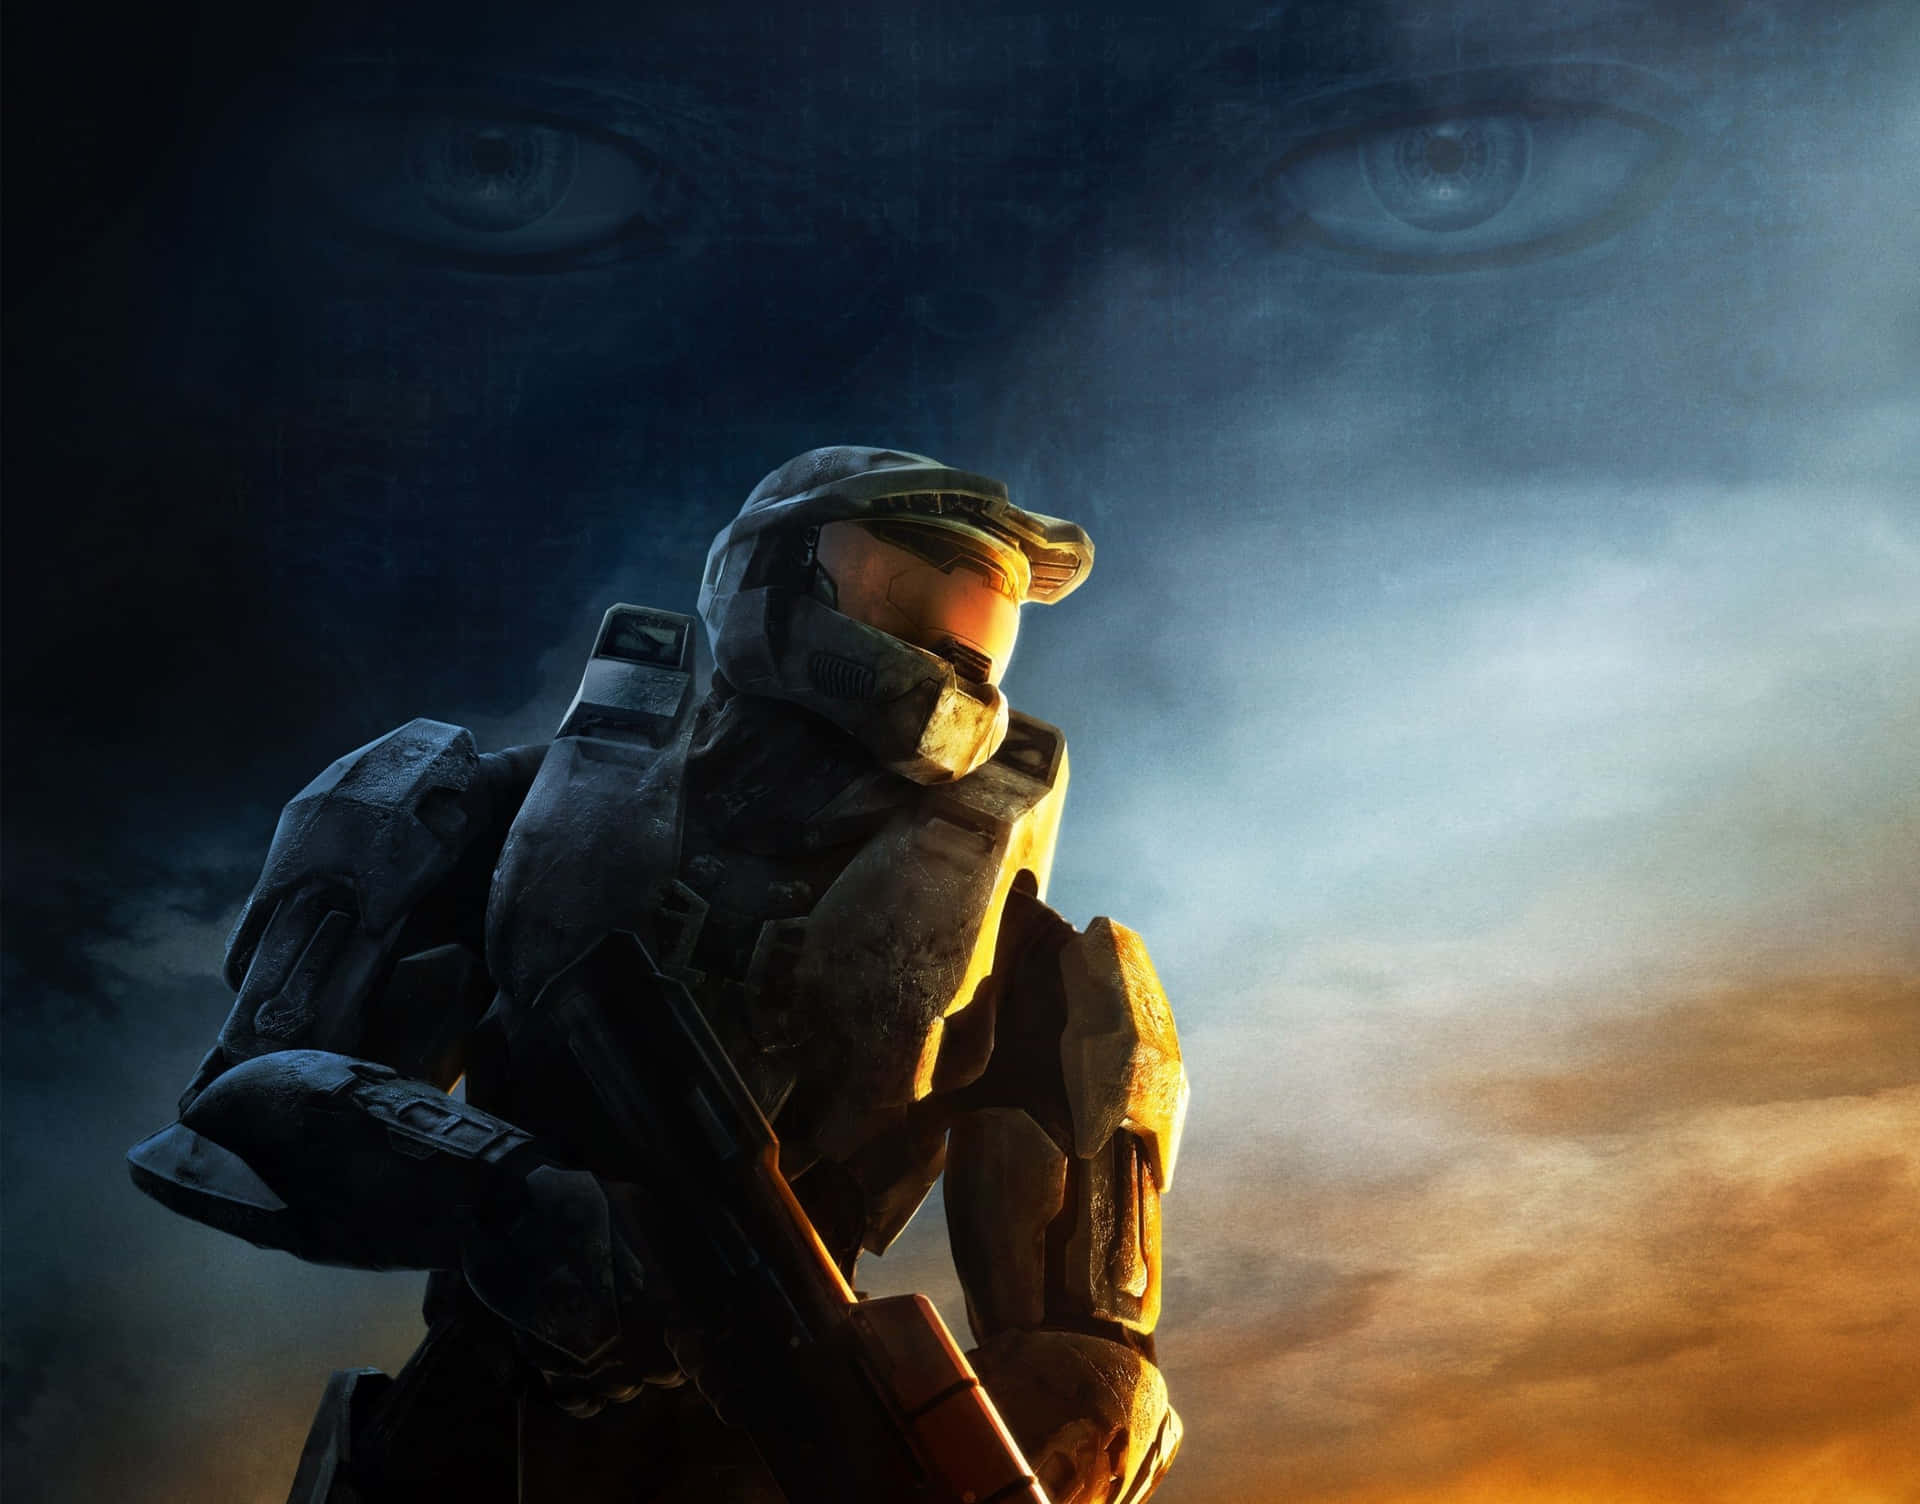 Master Chief tager kampen op mod Covenant i Halo Infinite. Wallpaper